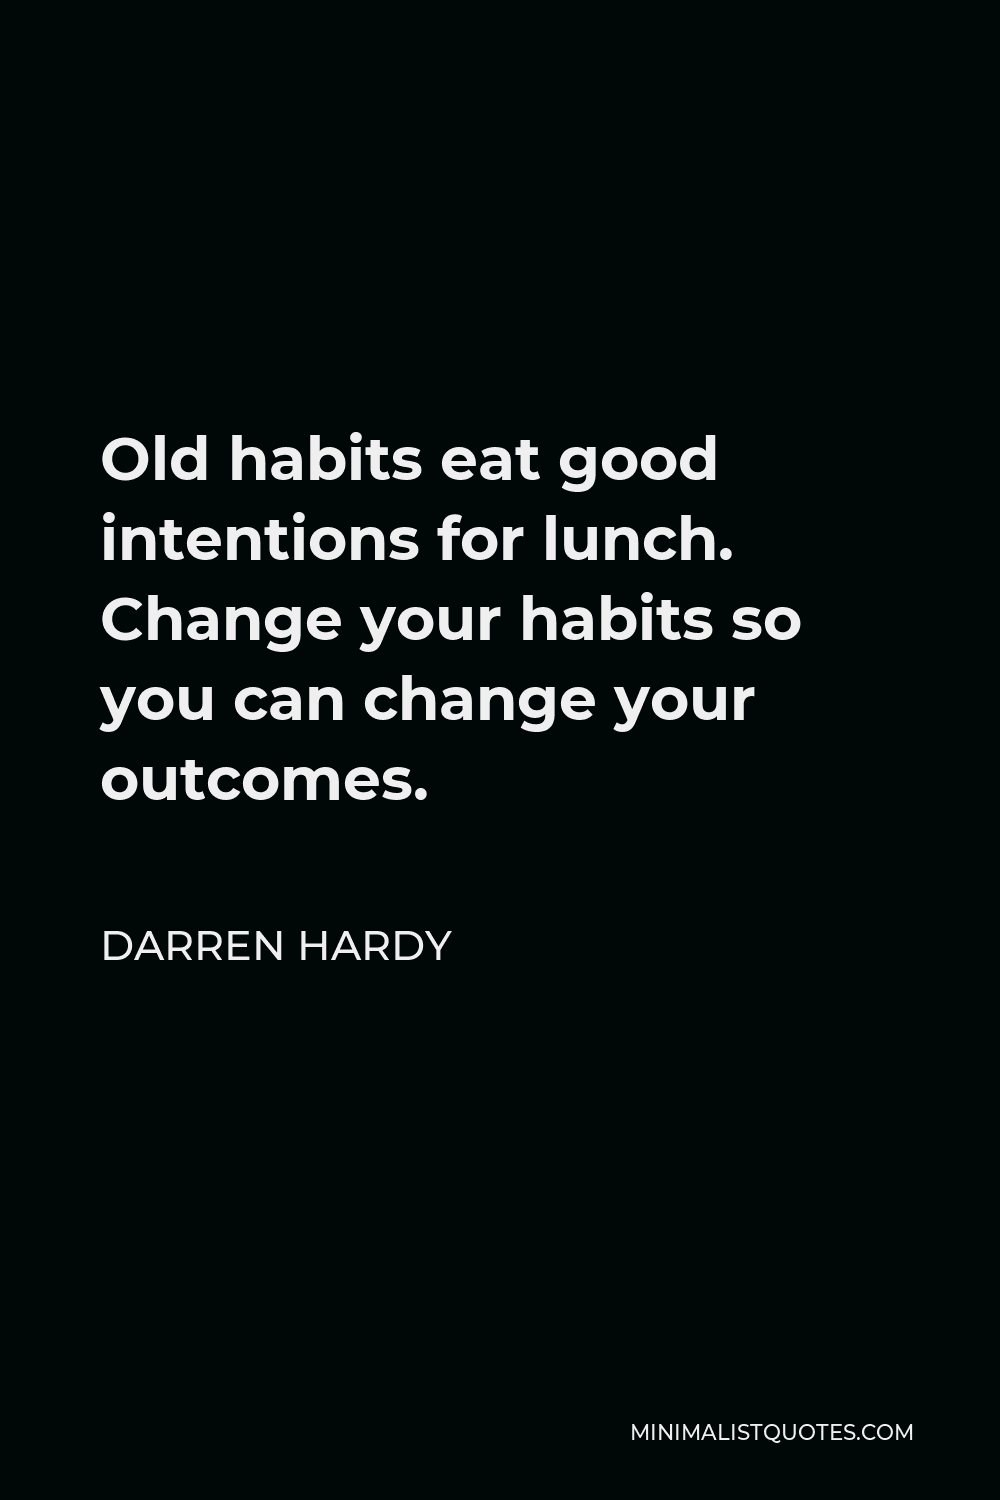 Darren Hardy Quote - Old habits eat good intentions for lunch. Change your habits so you can change your outcomes.